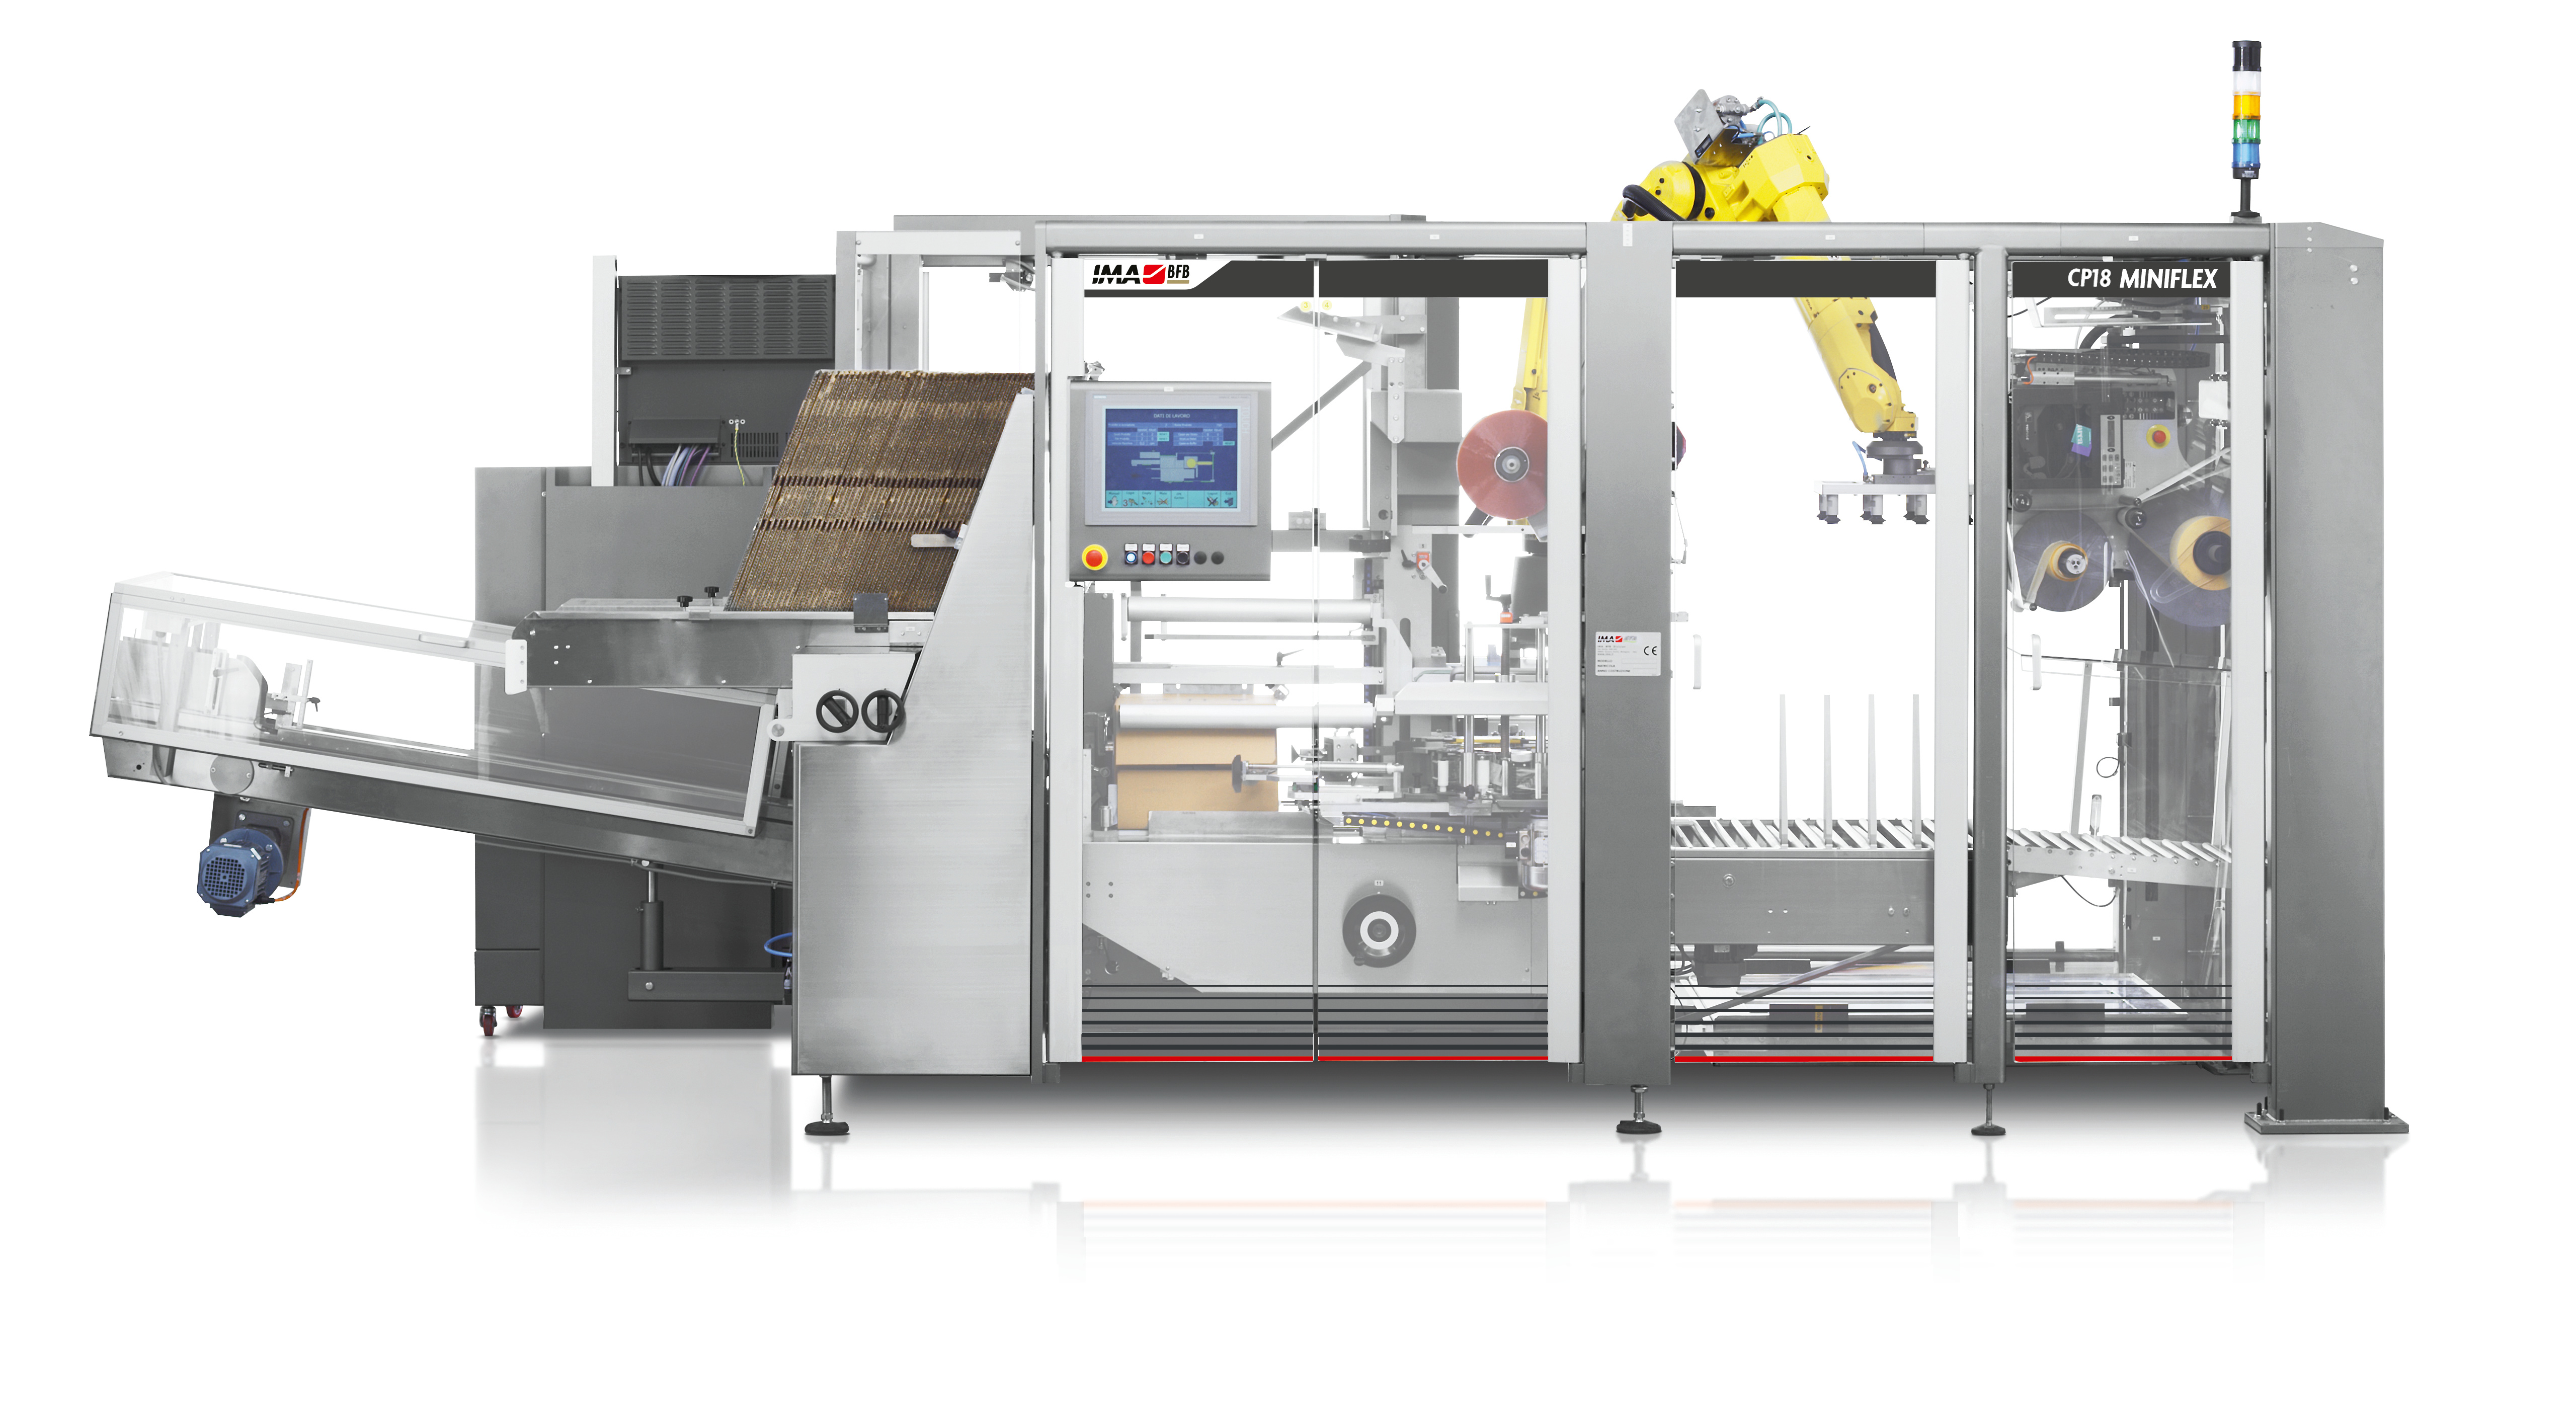 CP18-MINIFLEX, Case packing and palletising machine